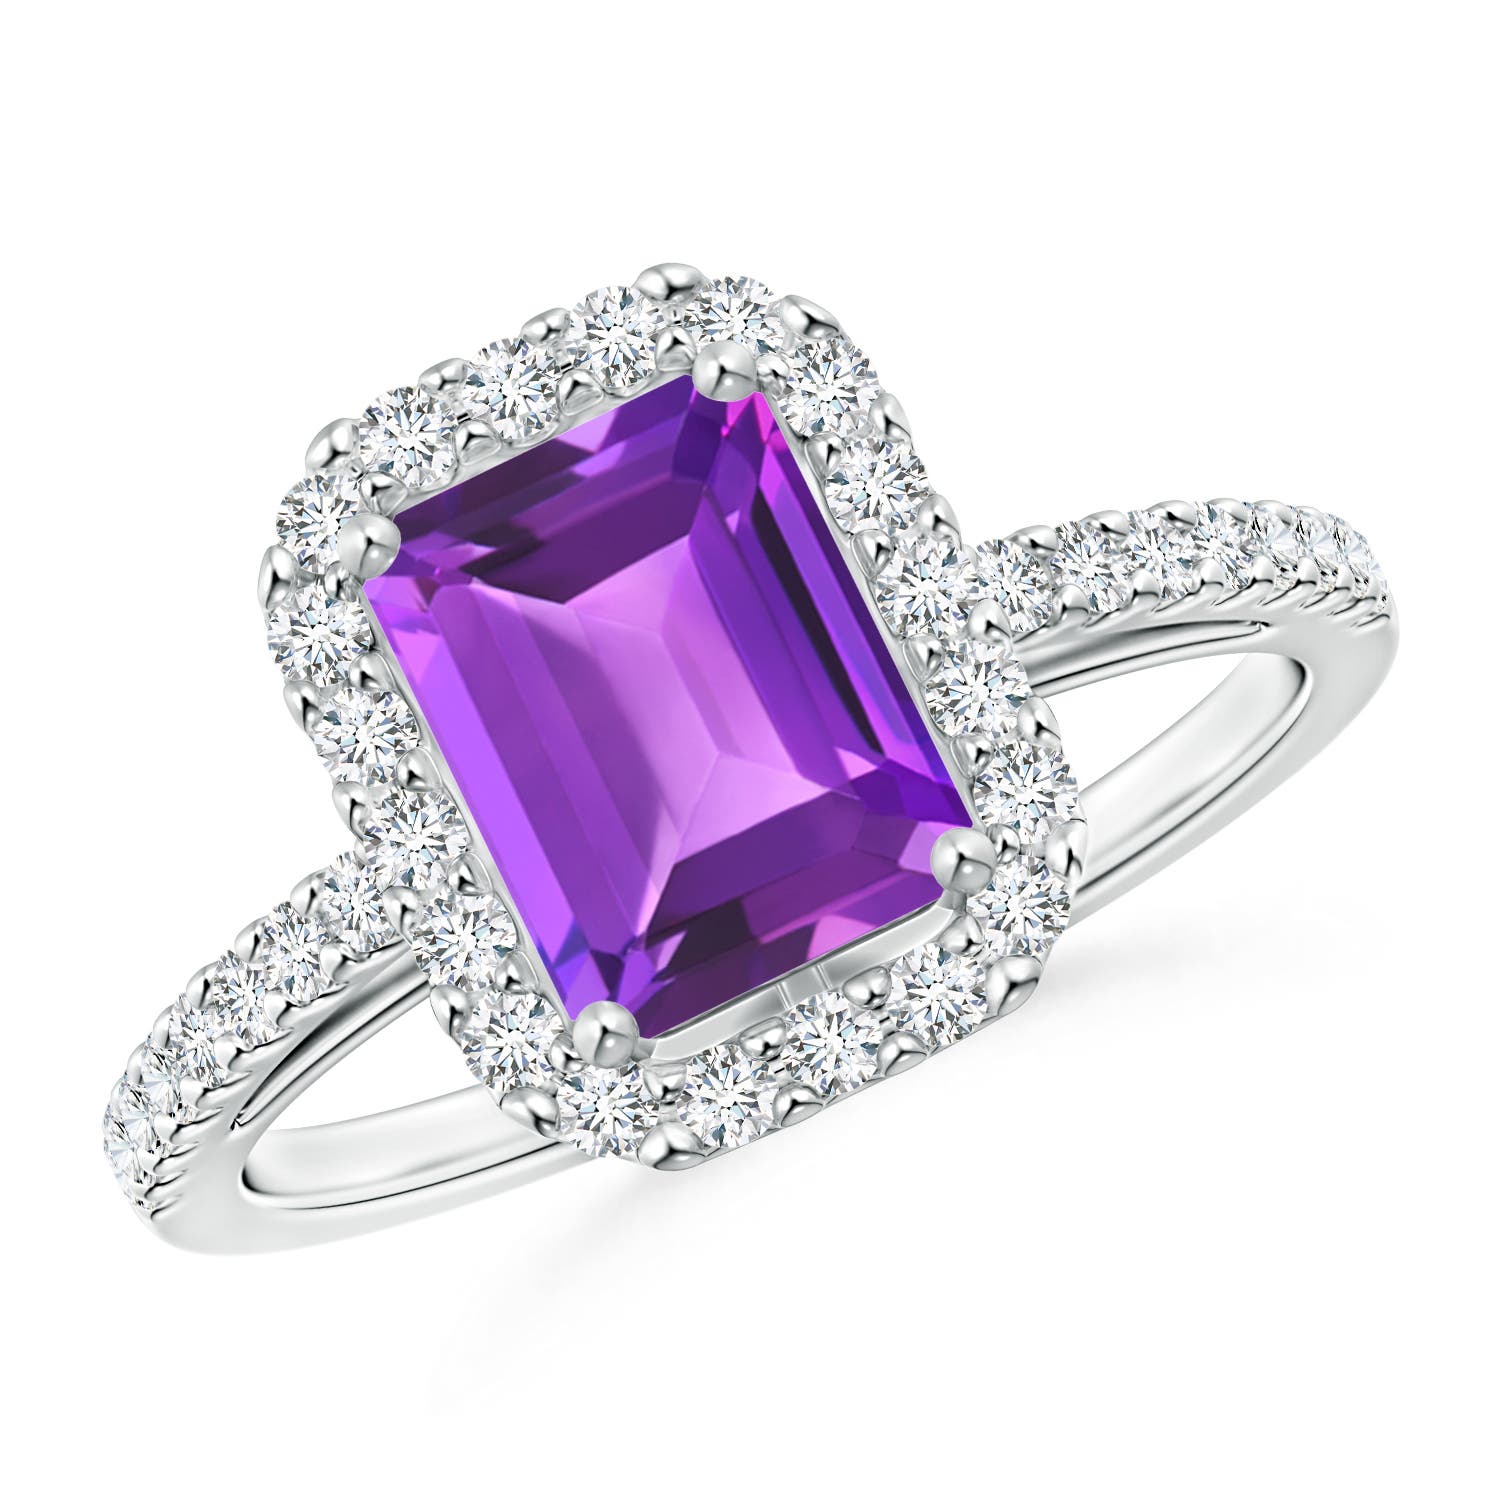 AAA - Amethyst / 1.91 CT / 14 KT White Gold